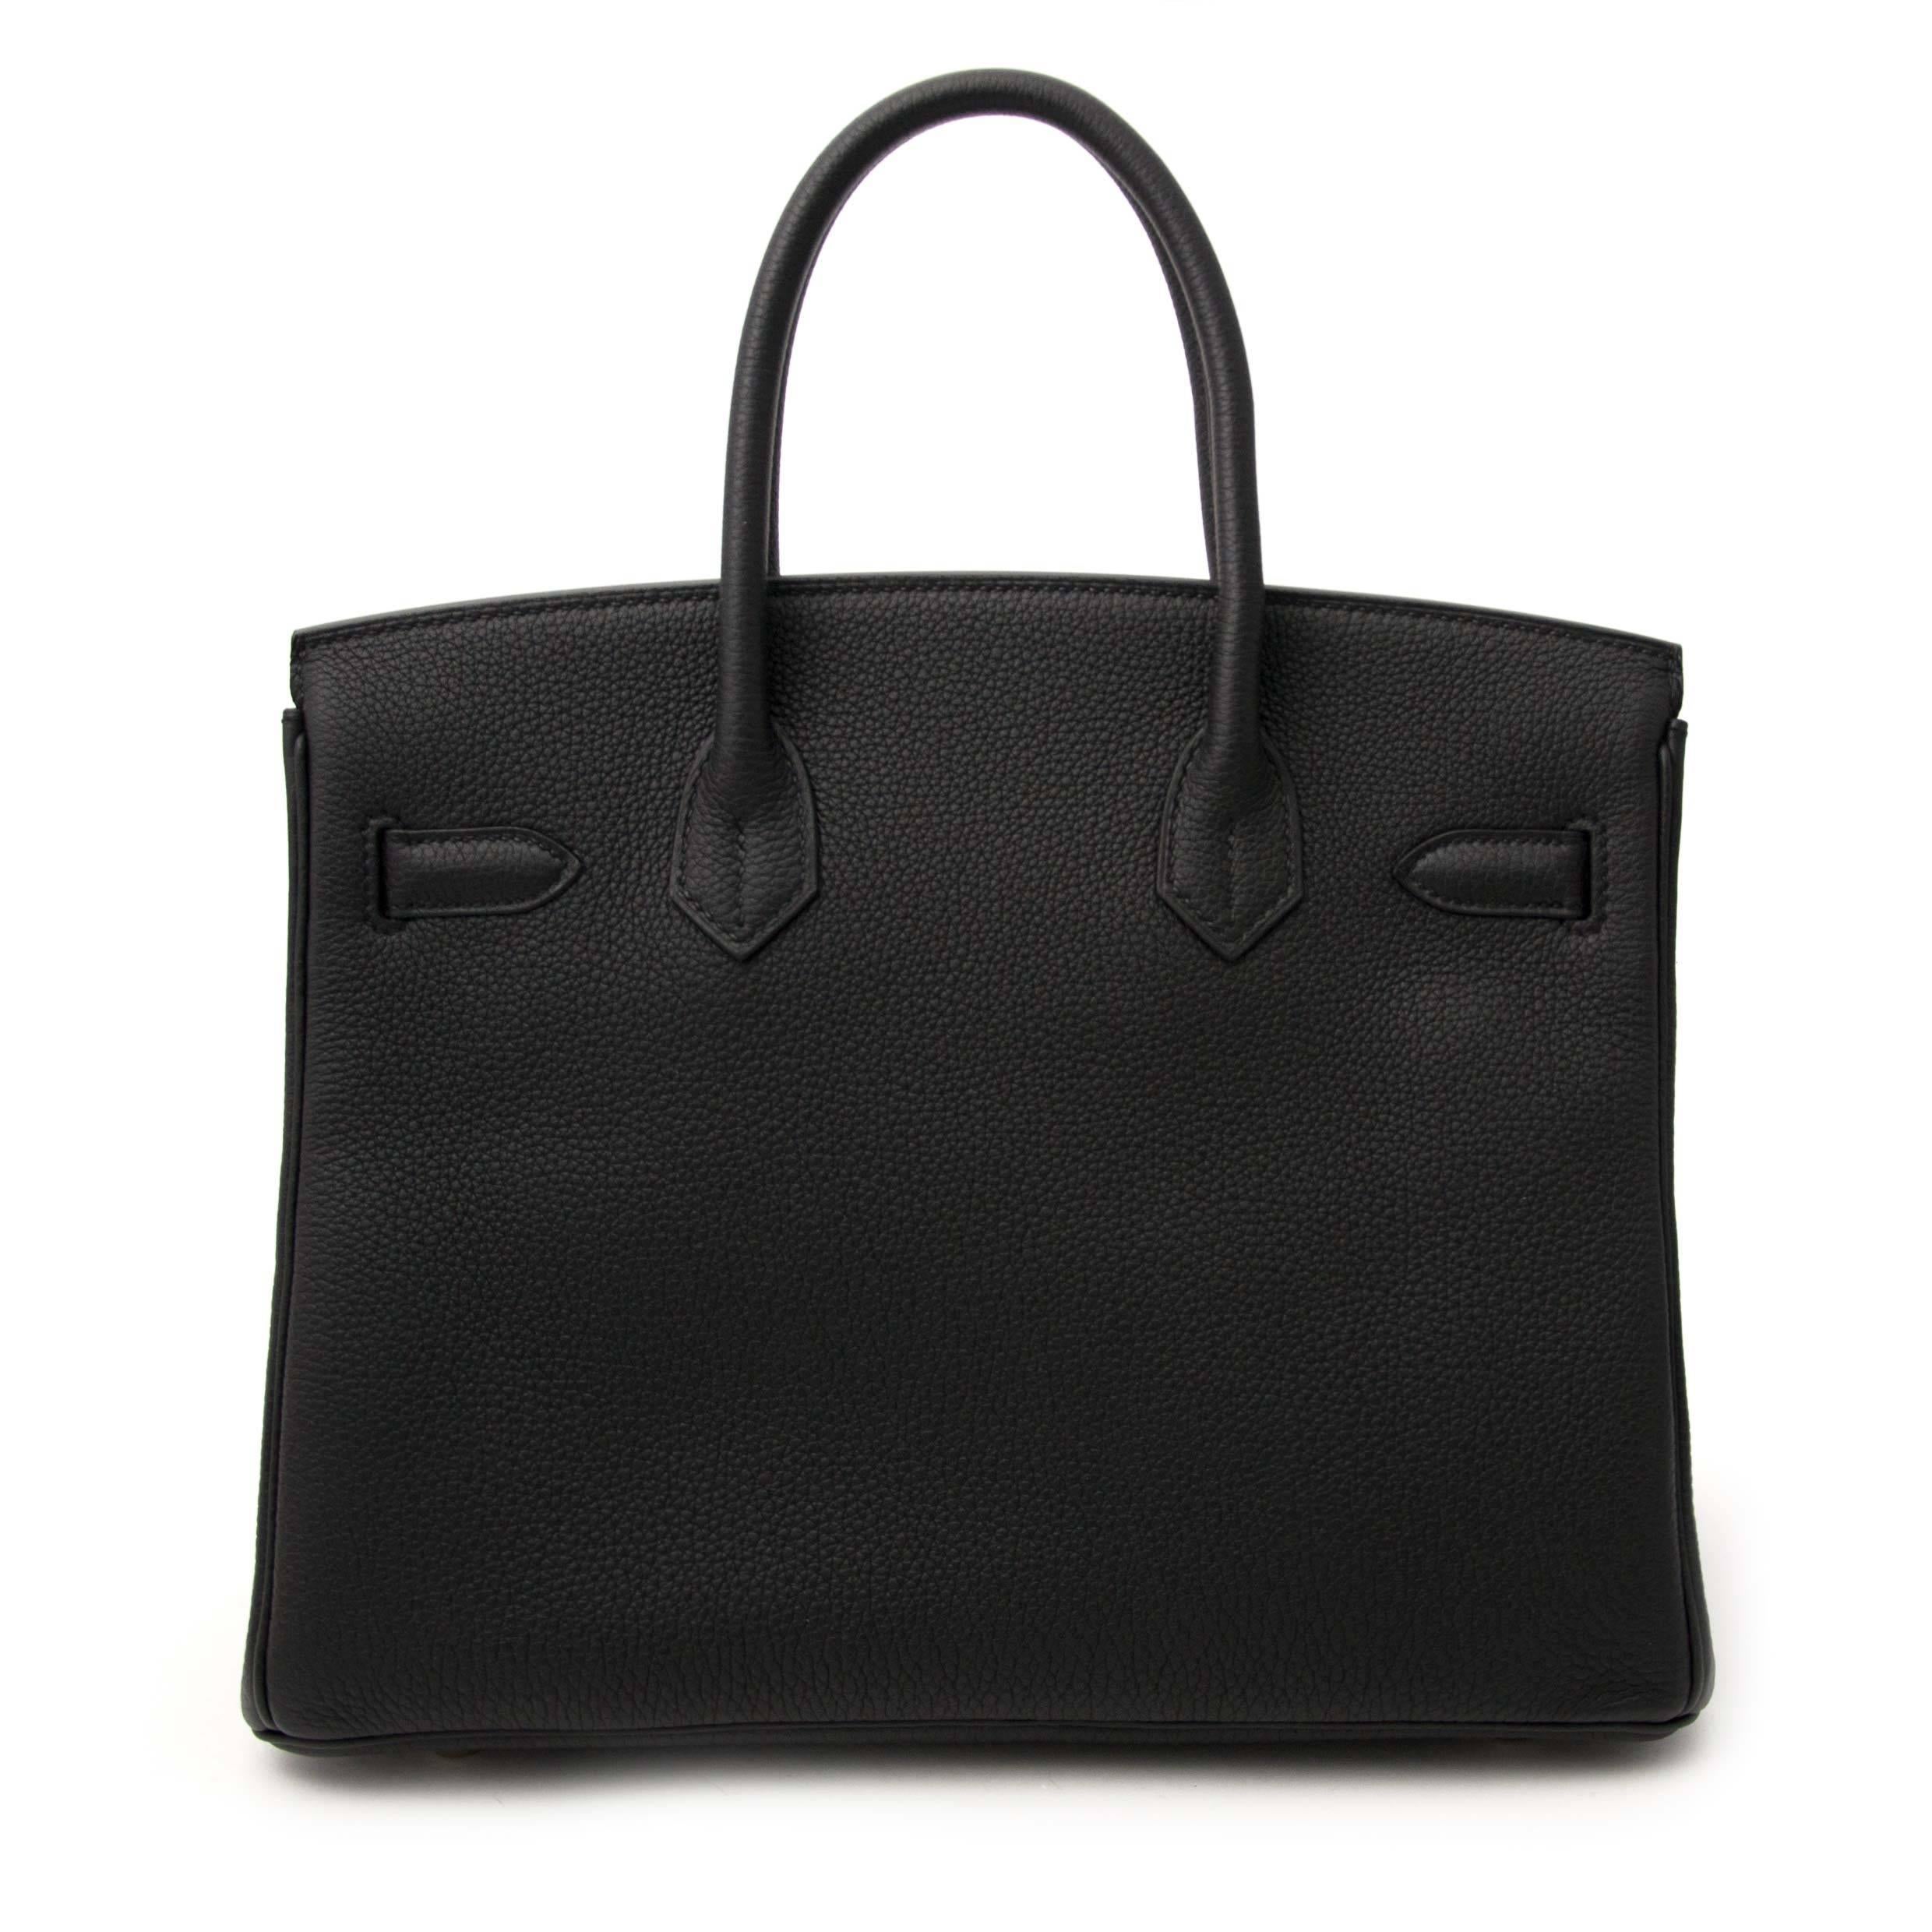 This iconic Hermes Birkin 30 Togo bag is a timeless and classic piece! The small size is harder to get then the Birkin 35.This -inspired by Jane Birkin- bag is made out of the highest scratch-resistant quality leather and features timeless silver